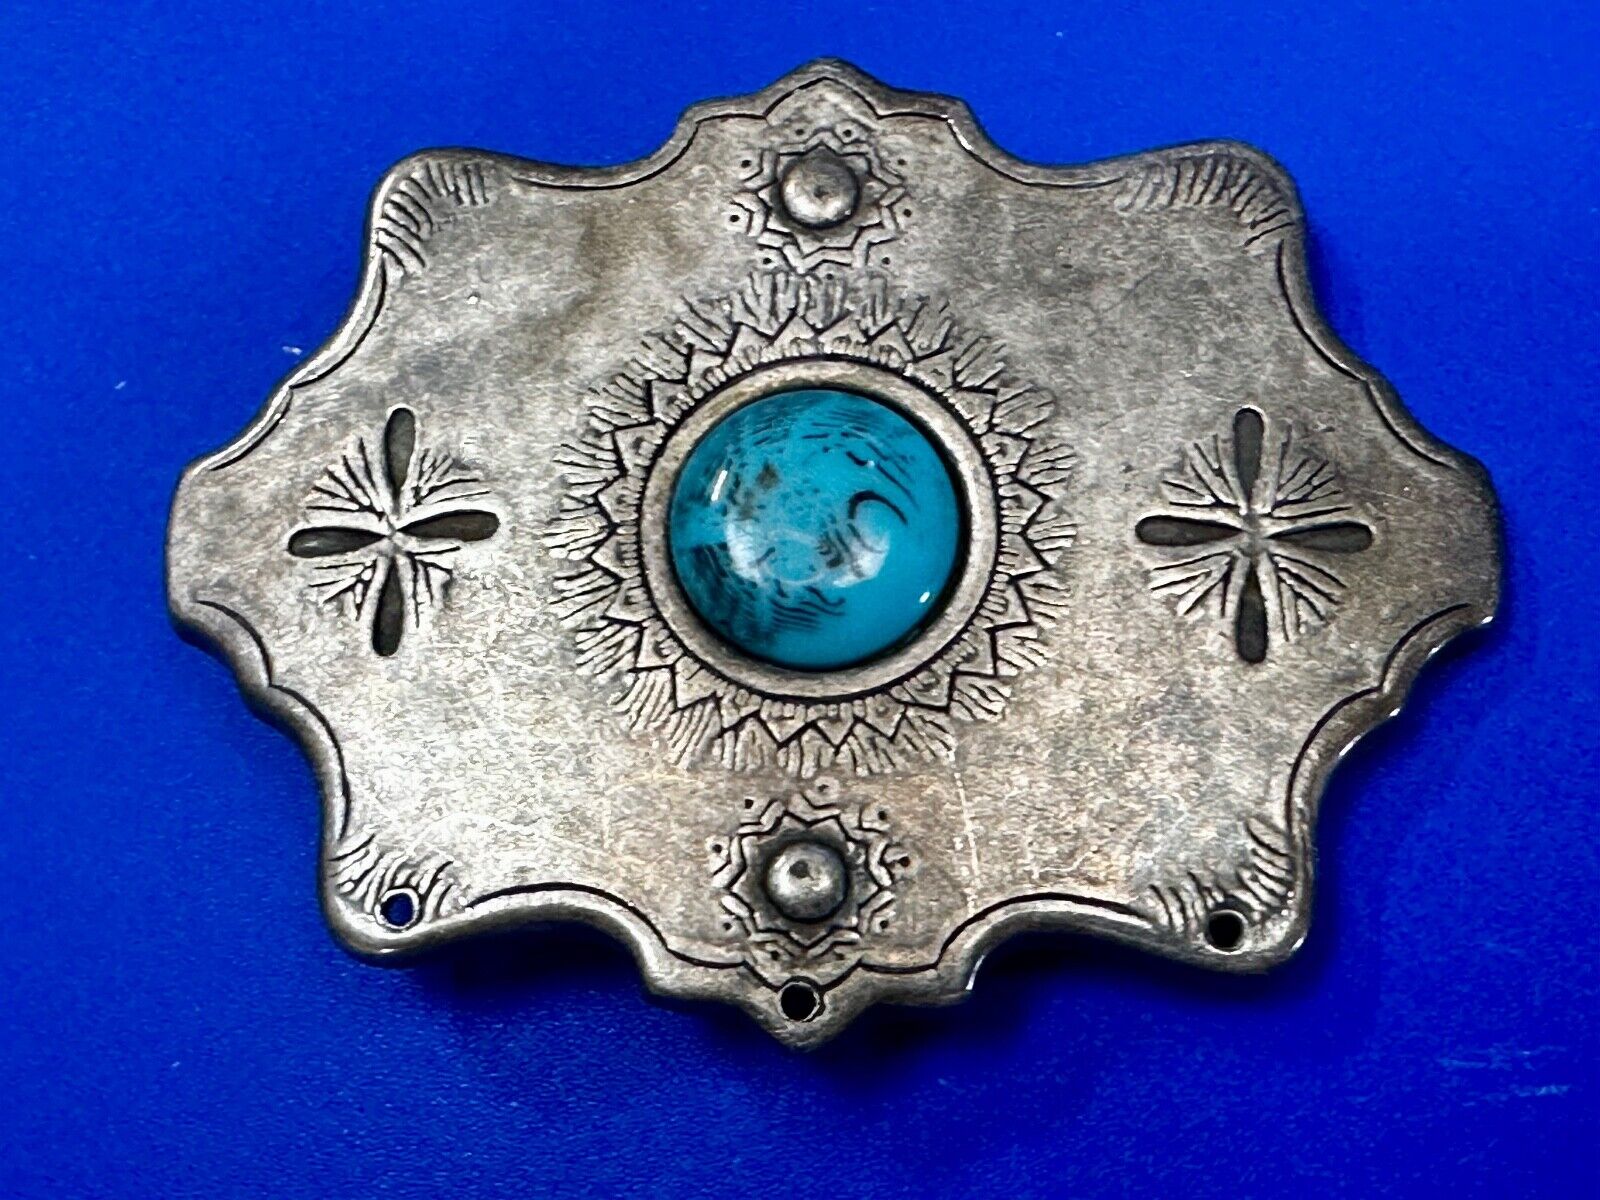 Interesting Small  Round Simulated Turquoise Centered Belt Buckle Made in Spain